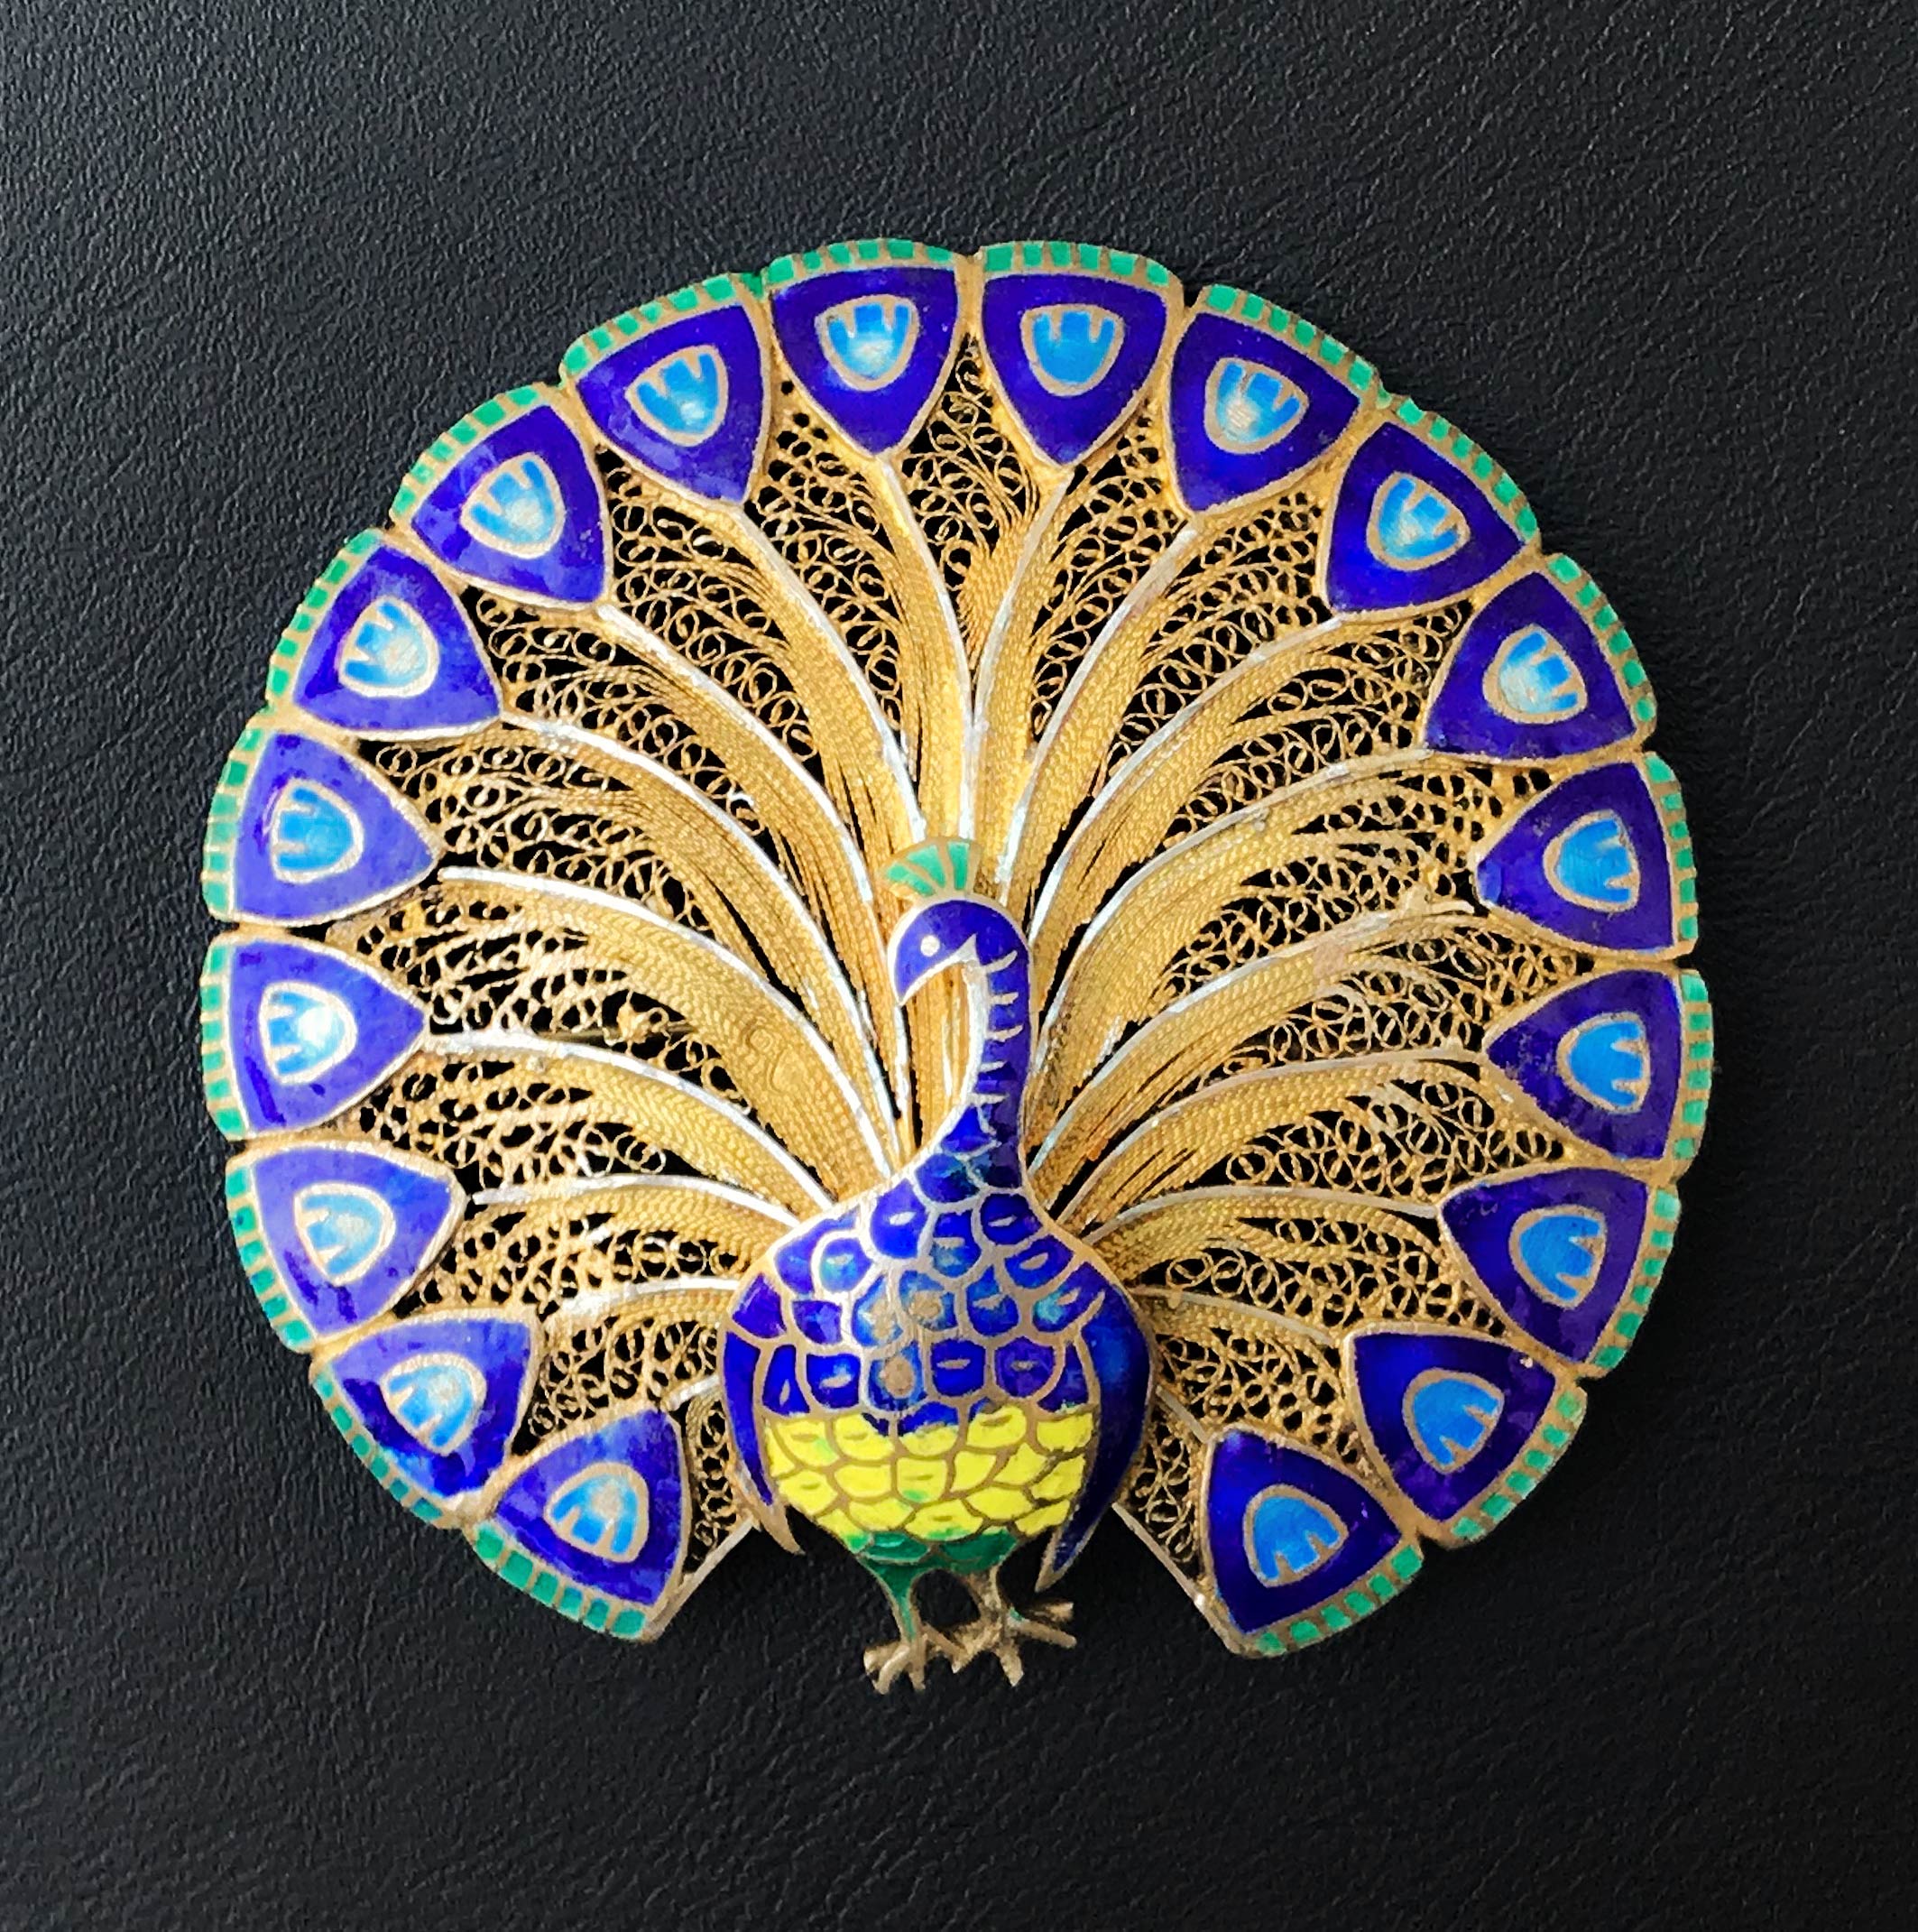 An excellent quality vintage brooch with delicate filigree detail finished in gilded silver with bright enamelled details on the peacock's body and at the end of his plumage - SHOP NOW - www.intovintage.co.uk